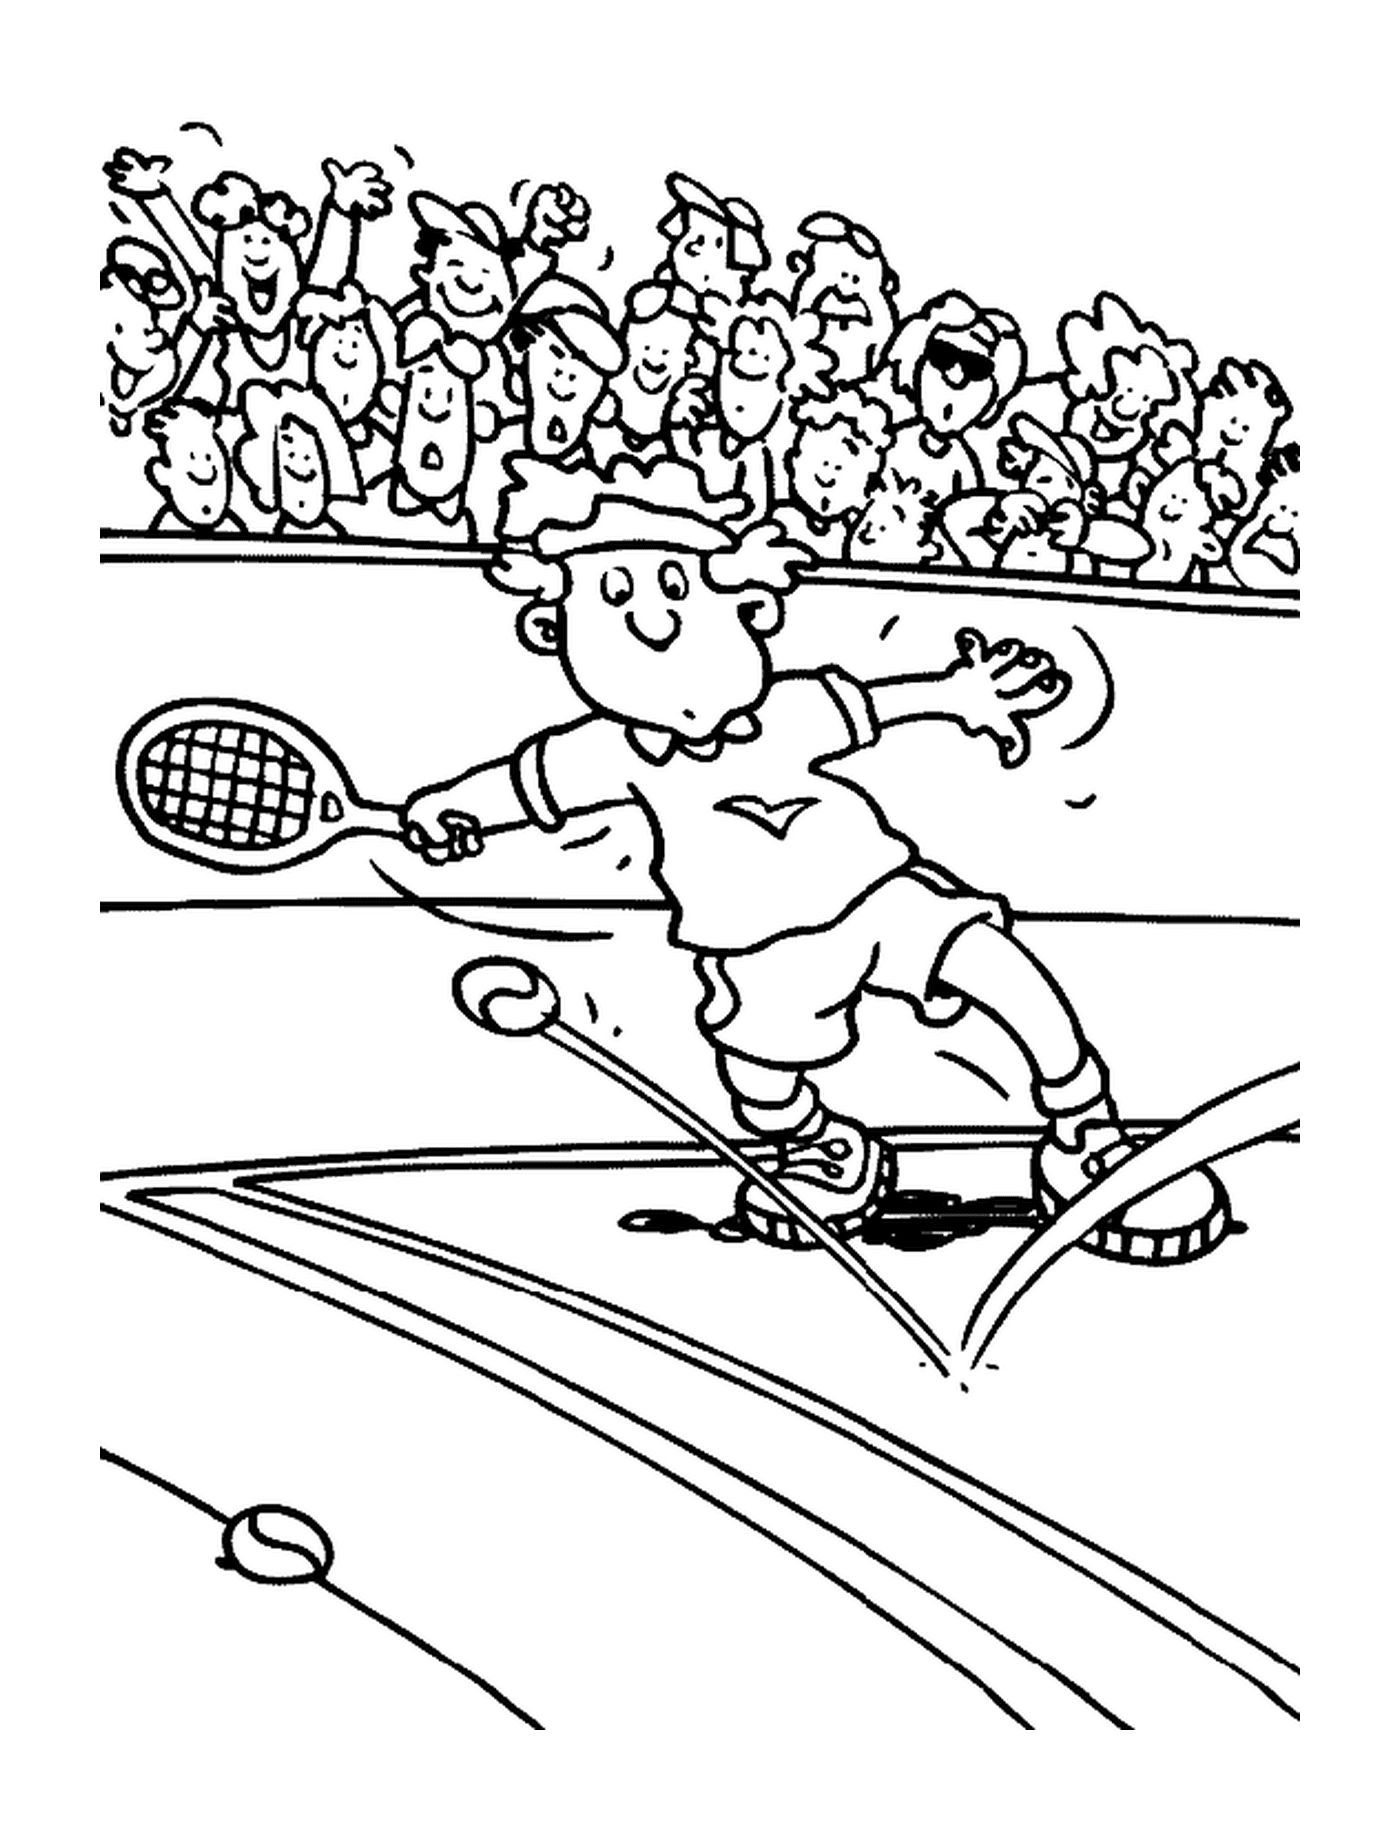  A man in tennis action 